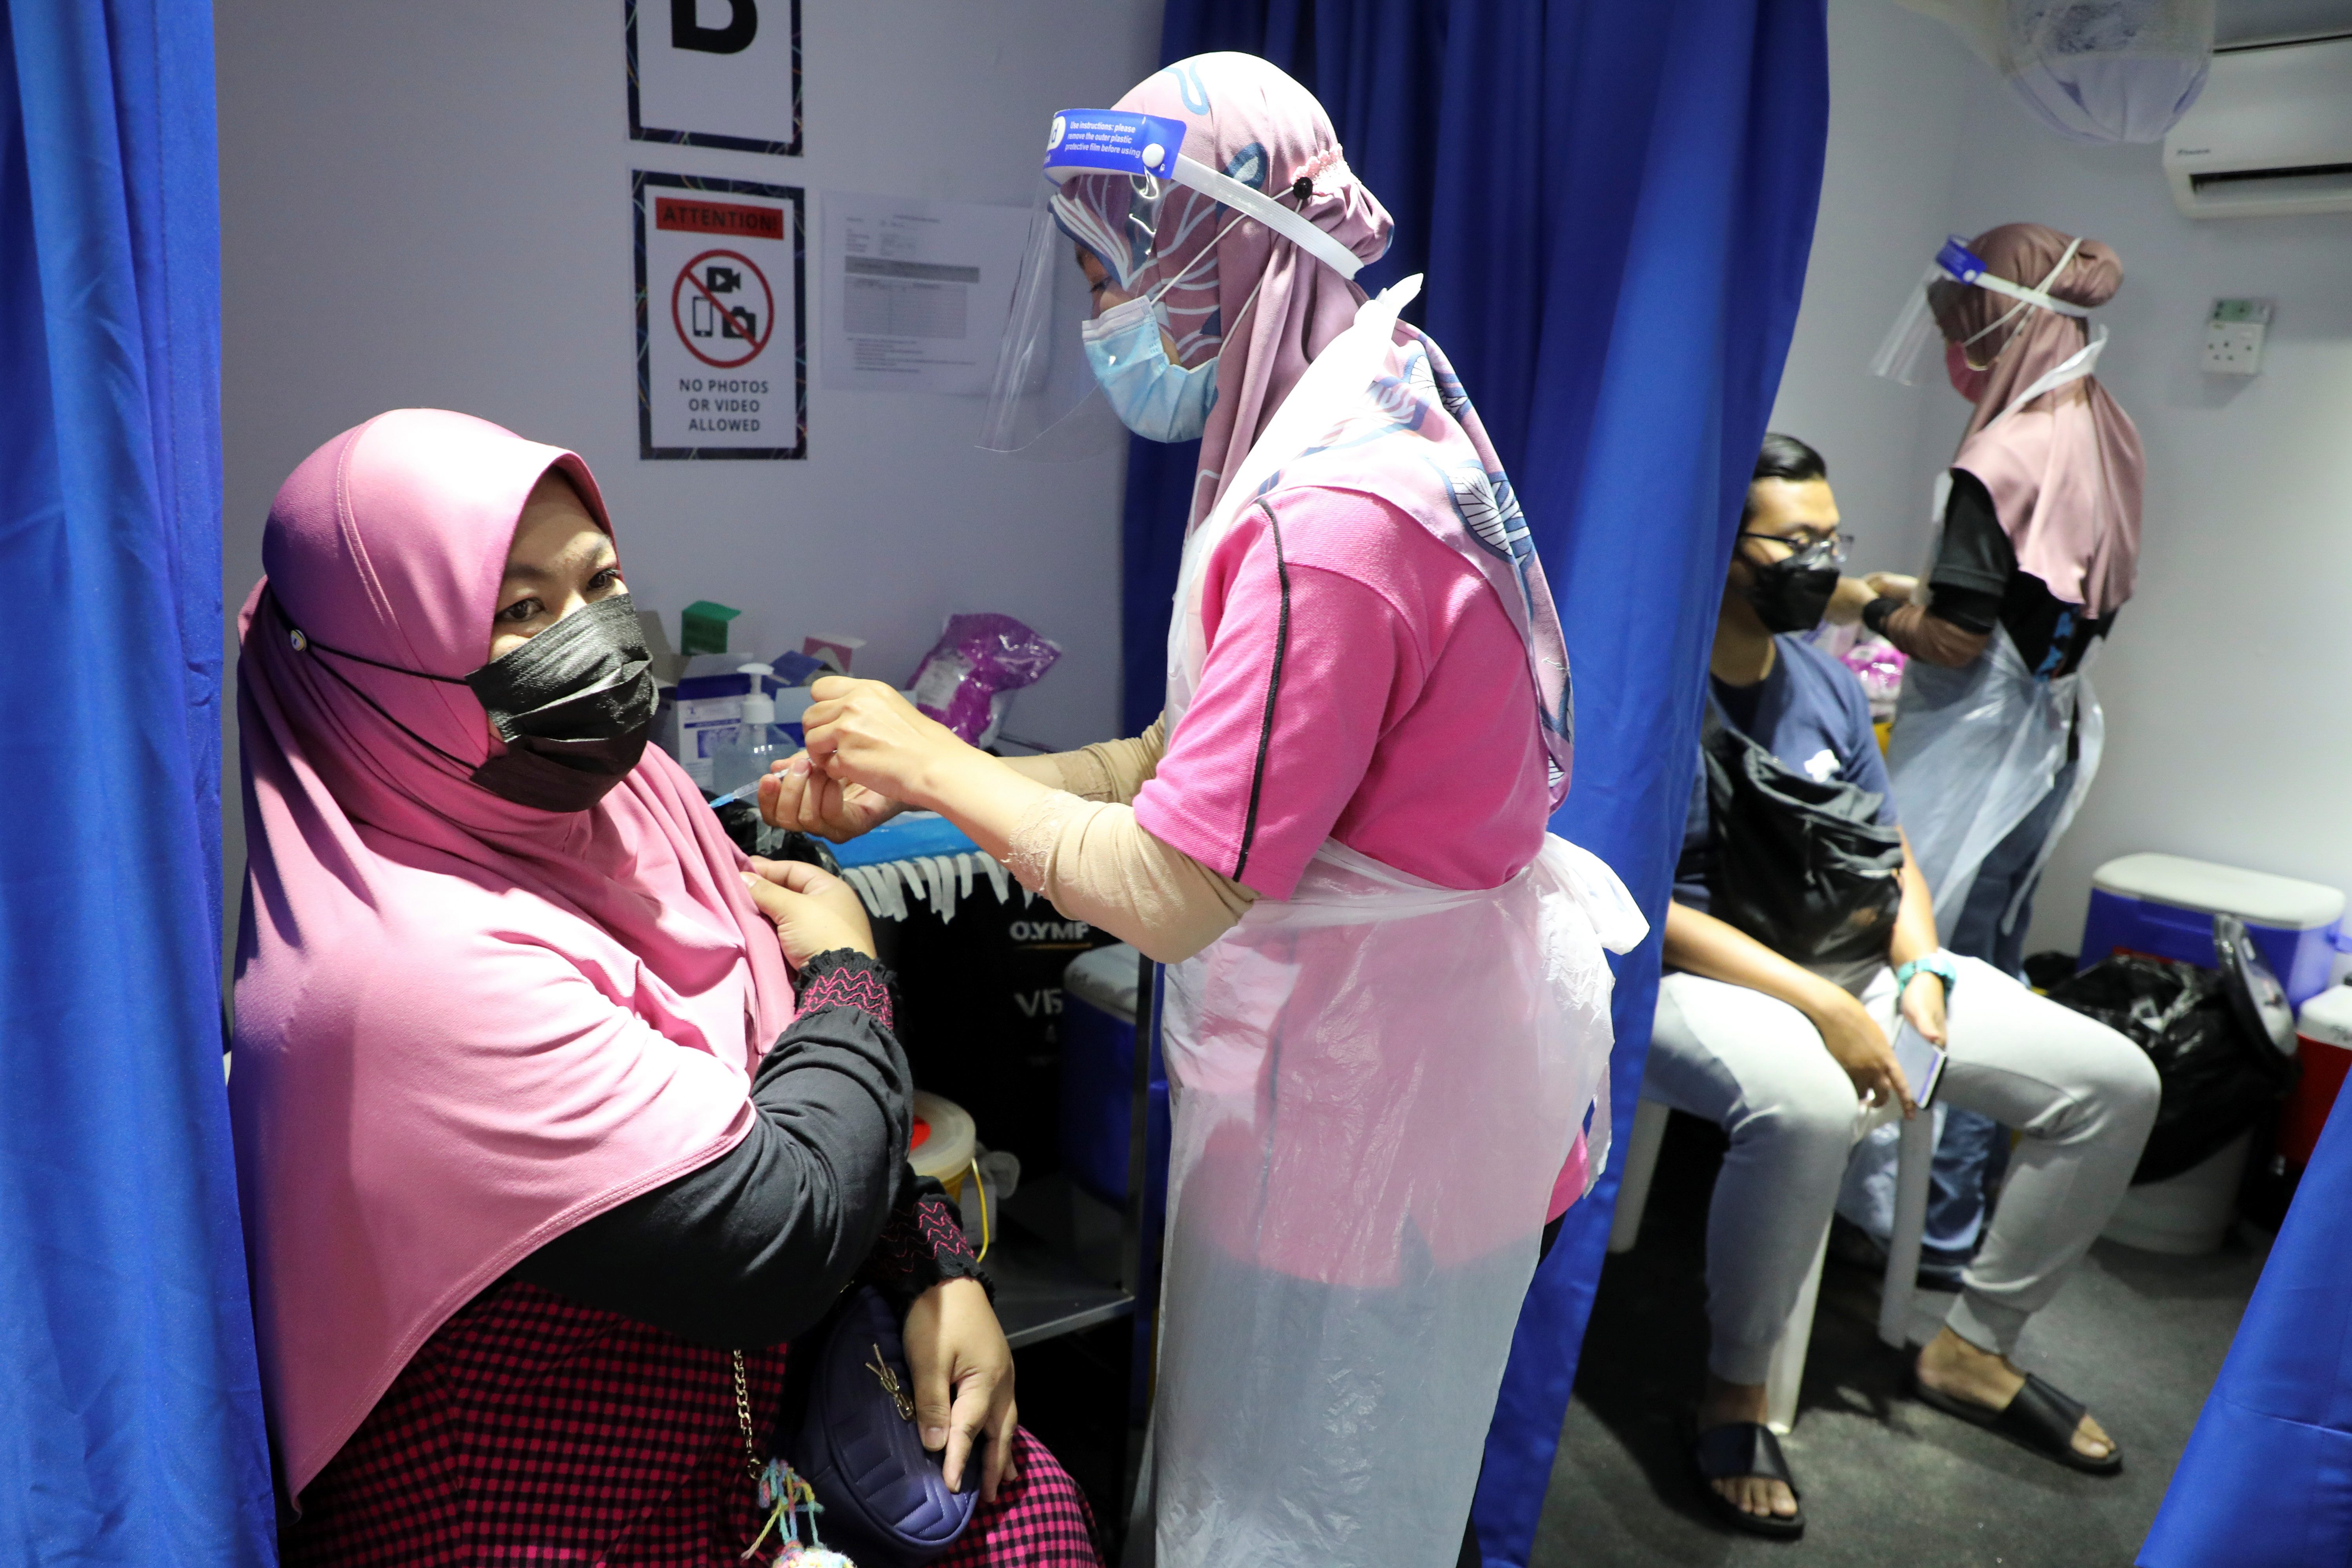 Malaysia to stop using Sinovac vaccine after supply ends – minister